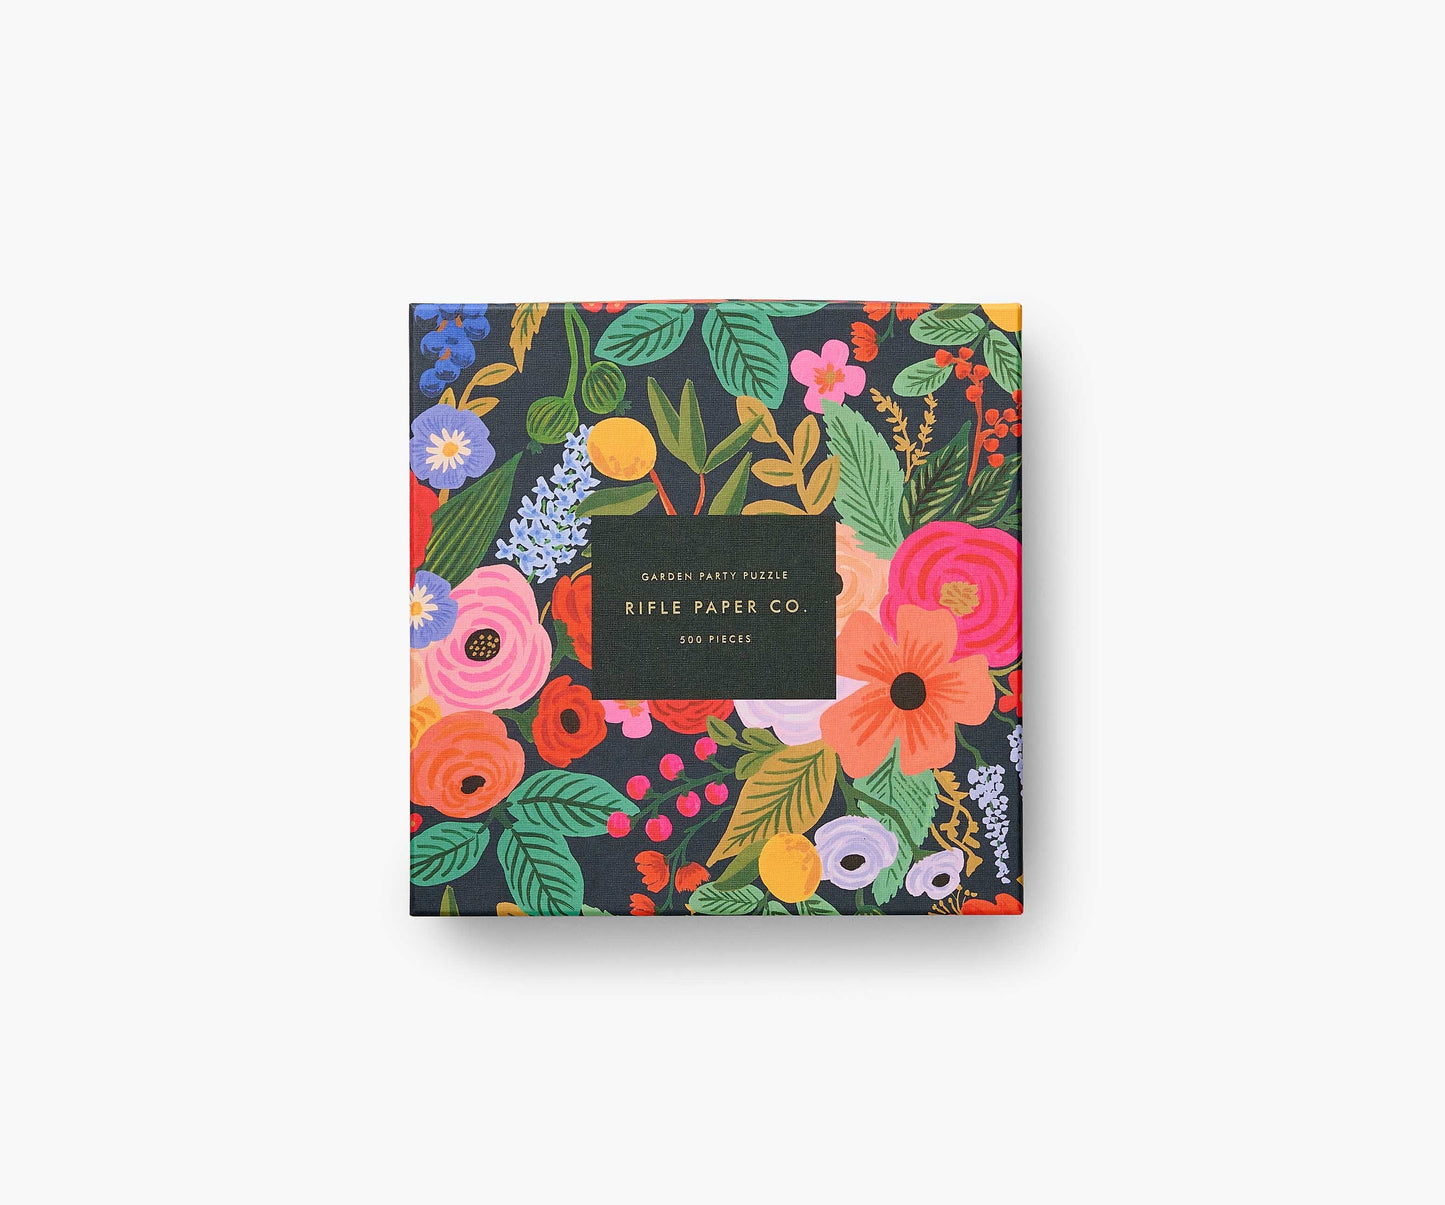 Rifle Paper Co - Garden Party Jigsaw Puzzle